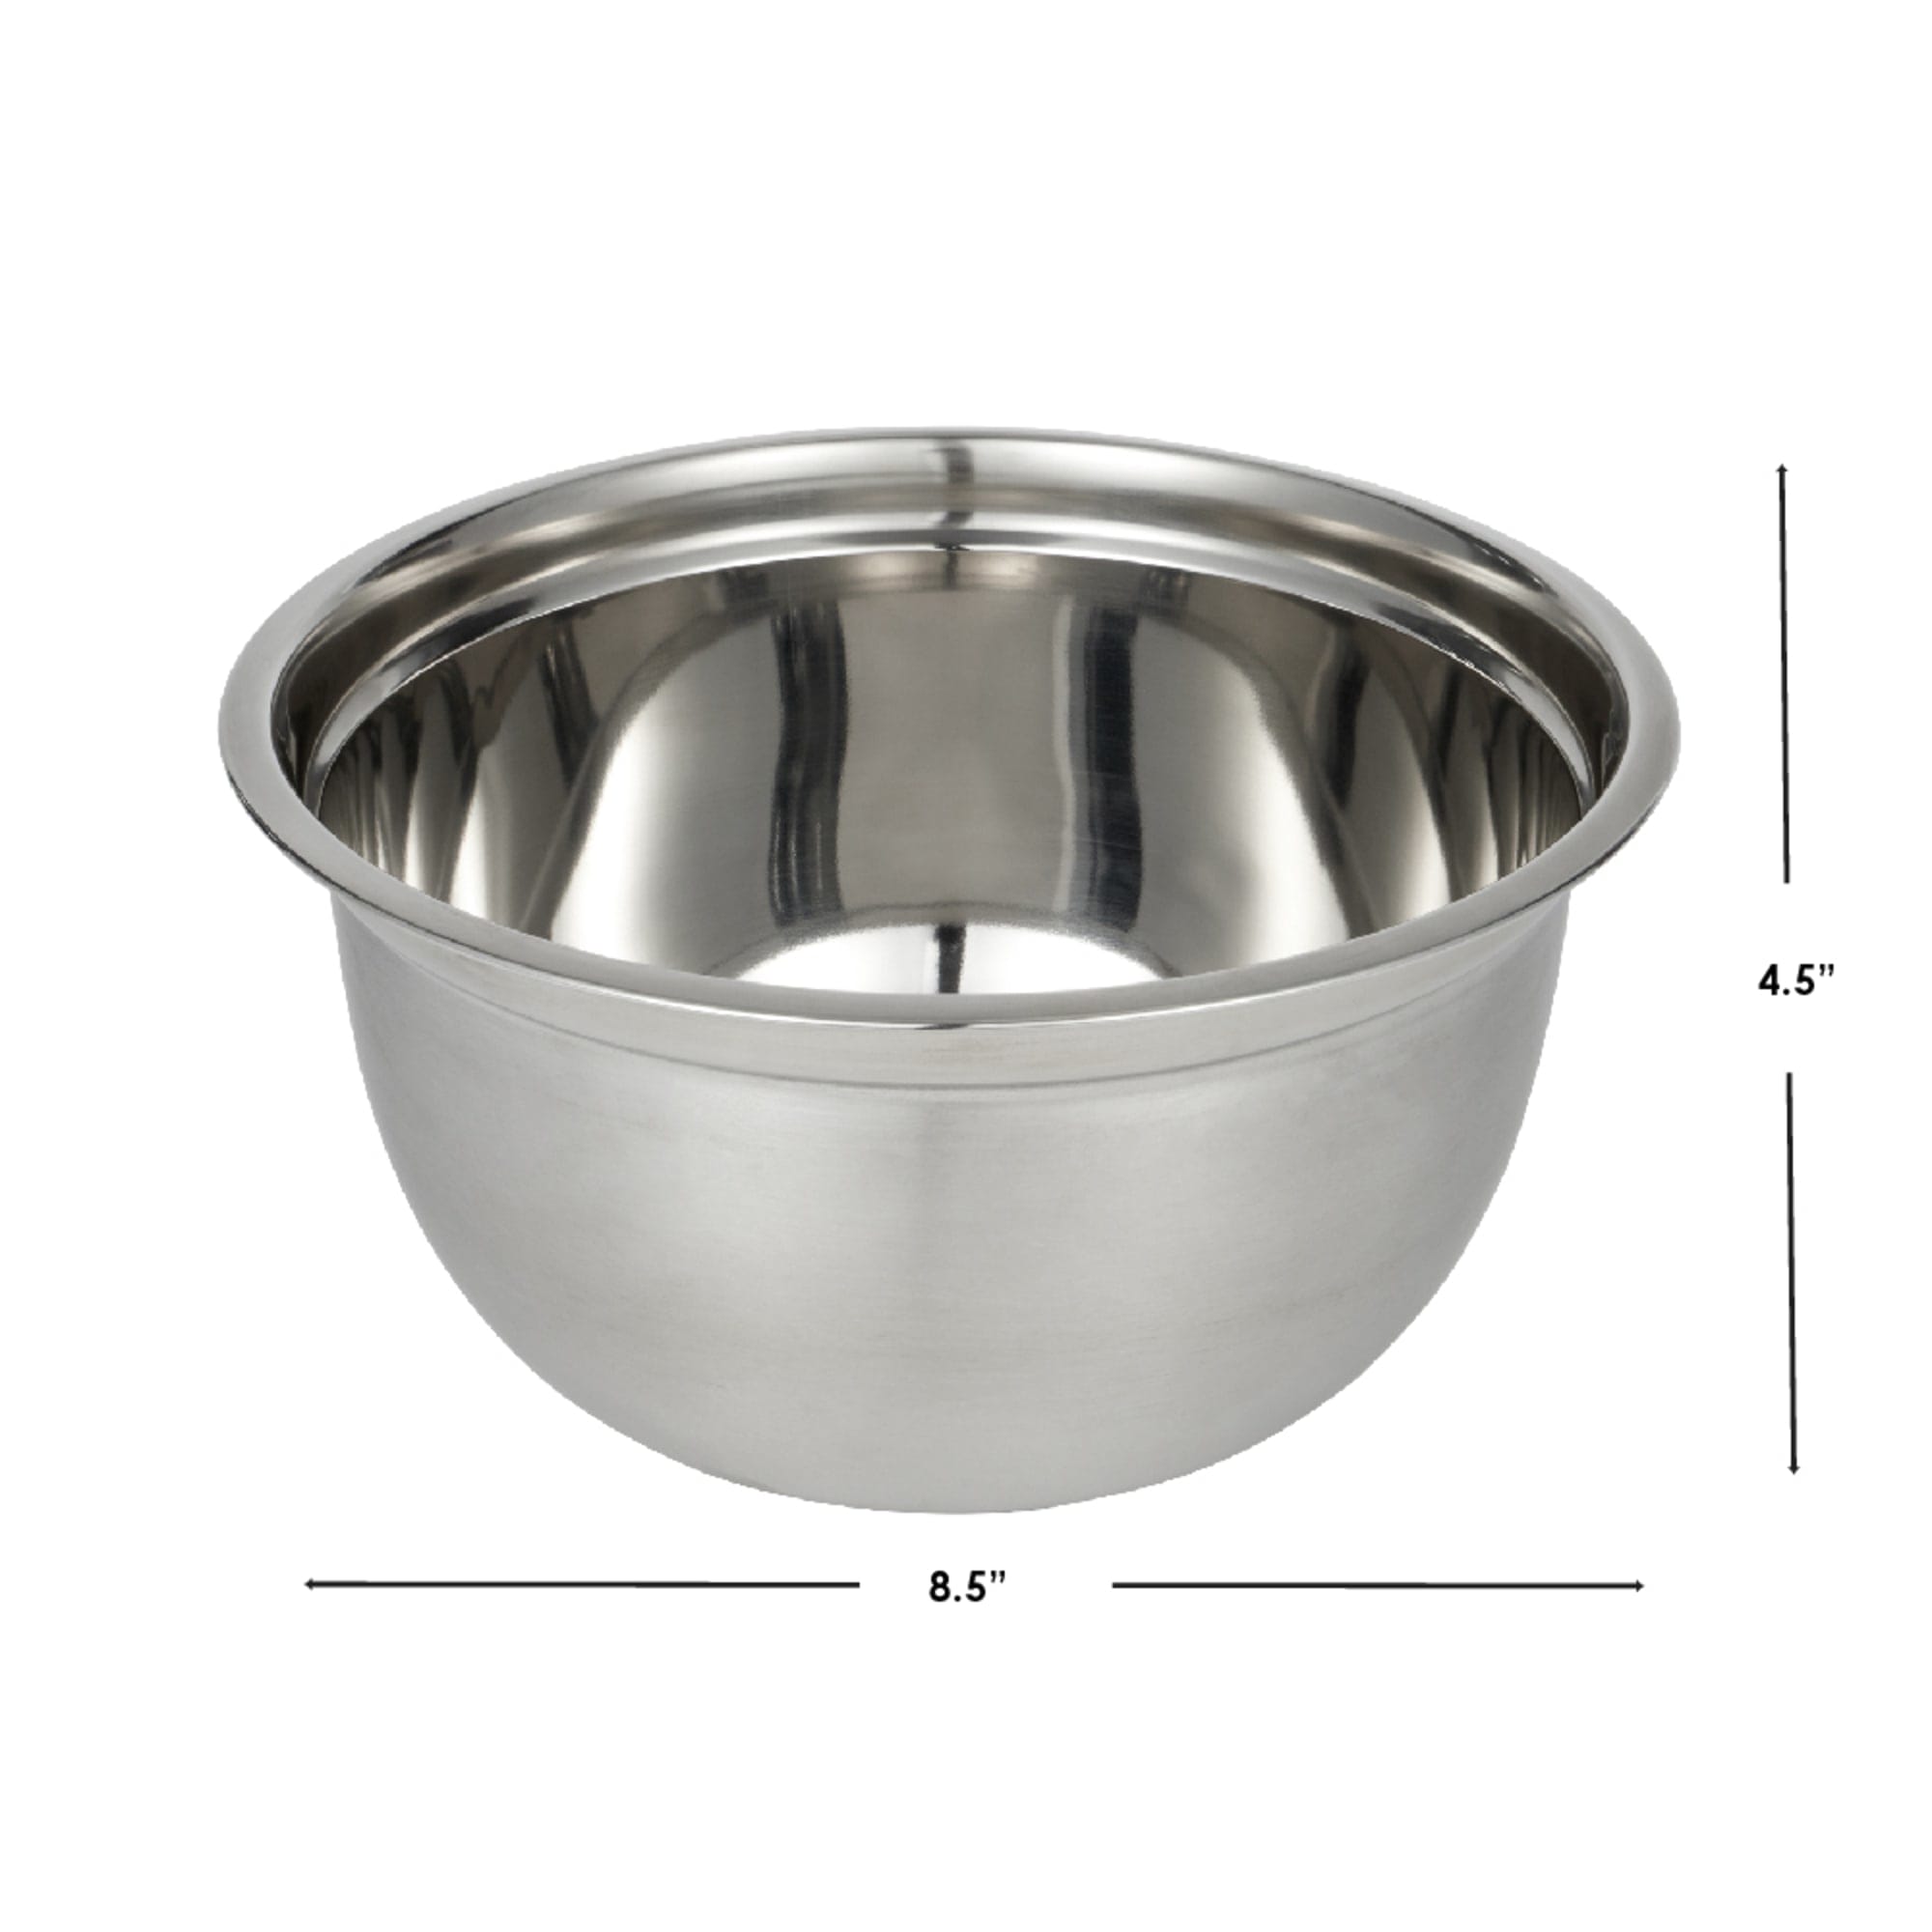 Home Basics 3QT. Stainless Steel Beveled Anti-Skid Mixing Bowl, Silver $4.00 EACH, CASE PACK OF 24